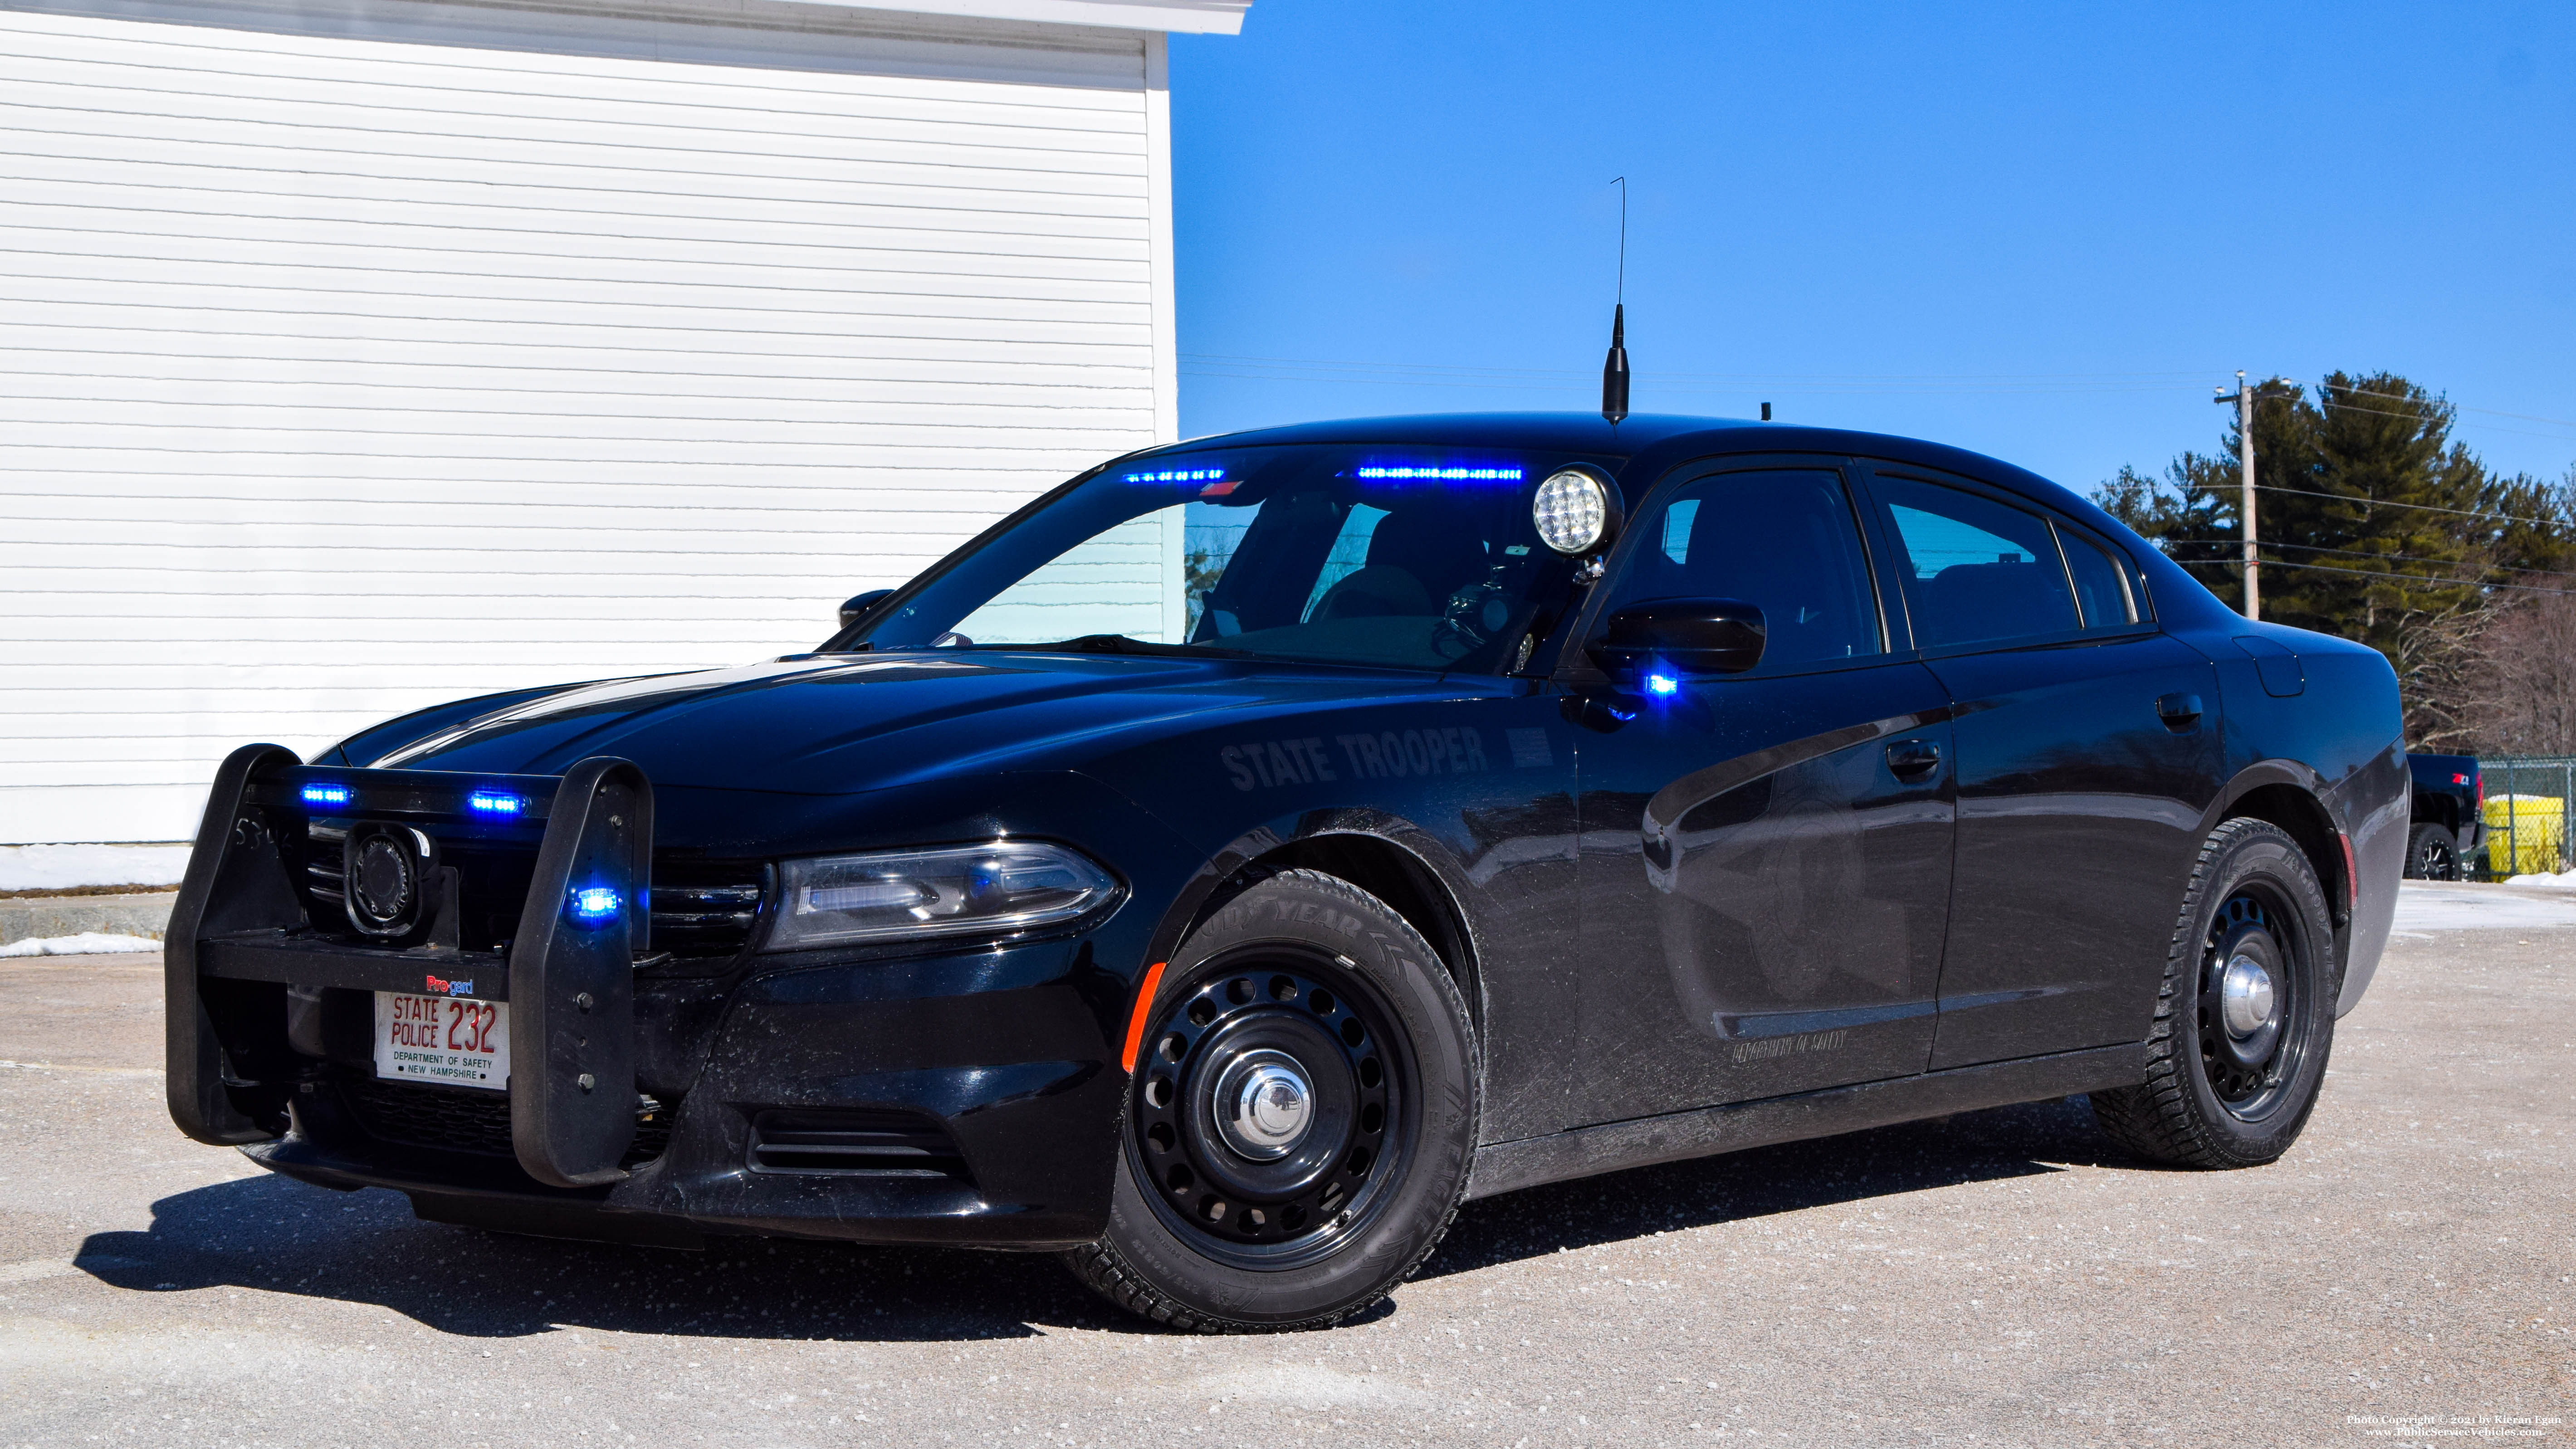 A photo  of New Hampshire State Police
            Cruiser 232, a 2018 Dodge Charger             taken by Kieran Egan